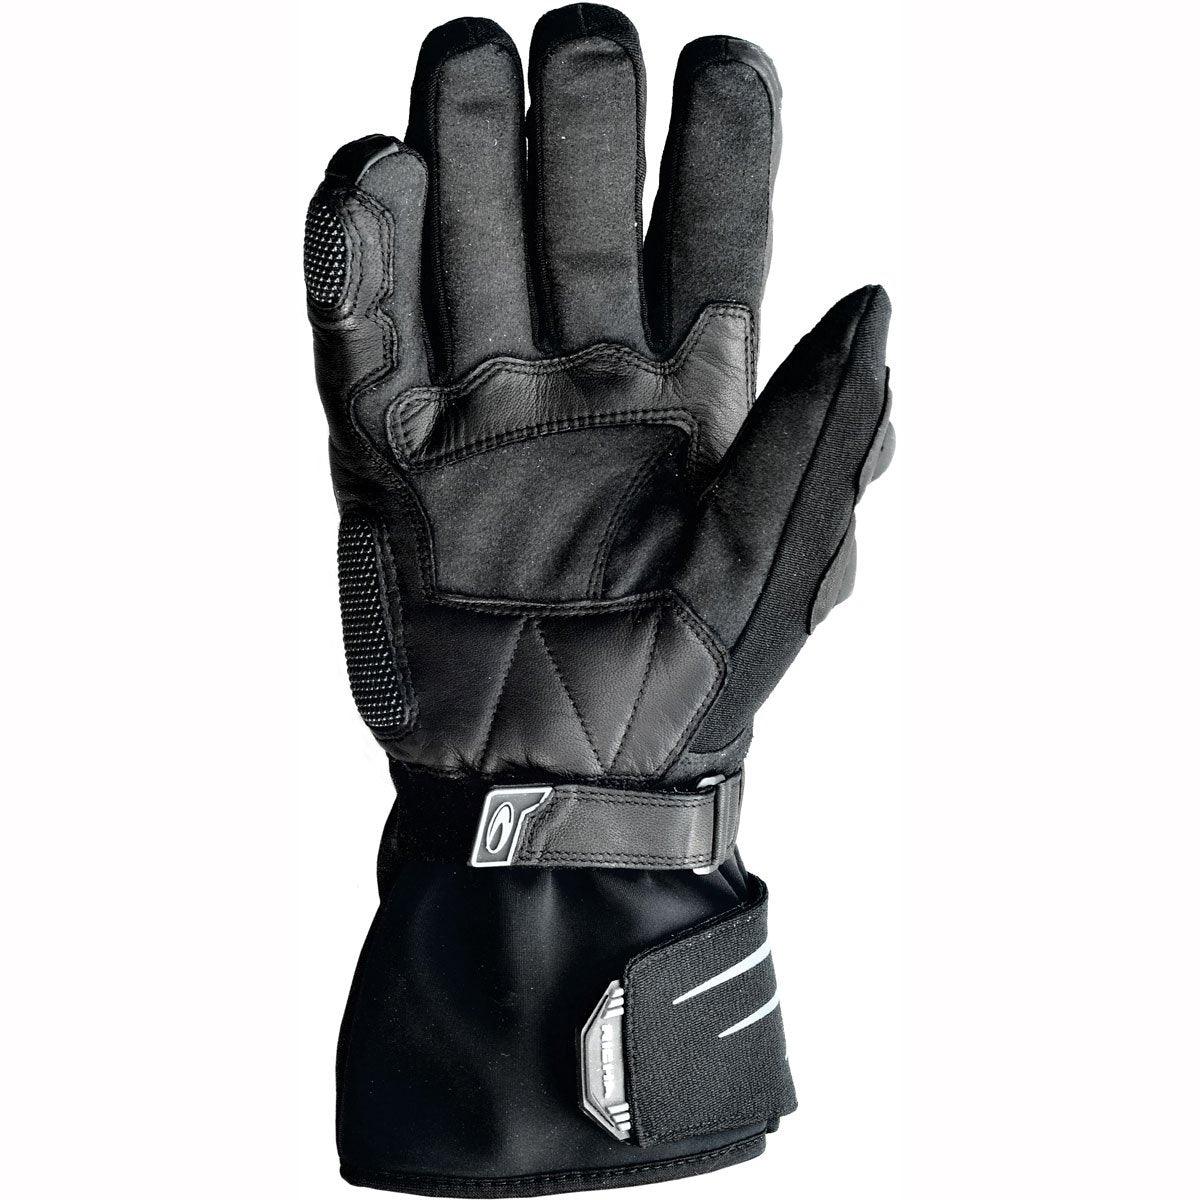 Richa Cold Protect Gloves GTX Black - Winter Motorcycle Gloves